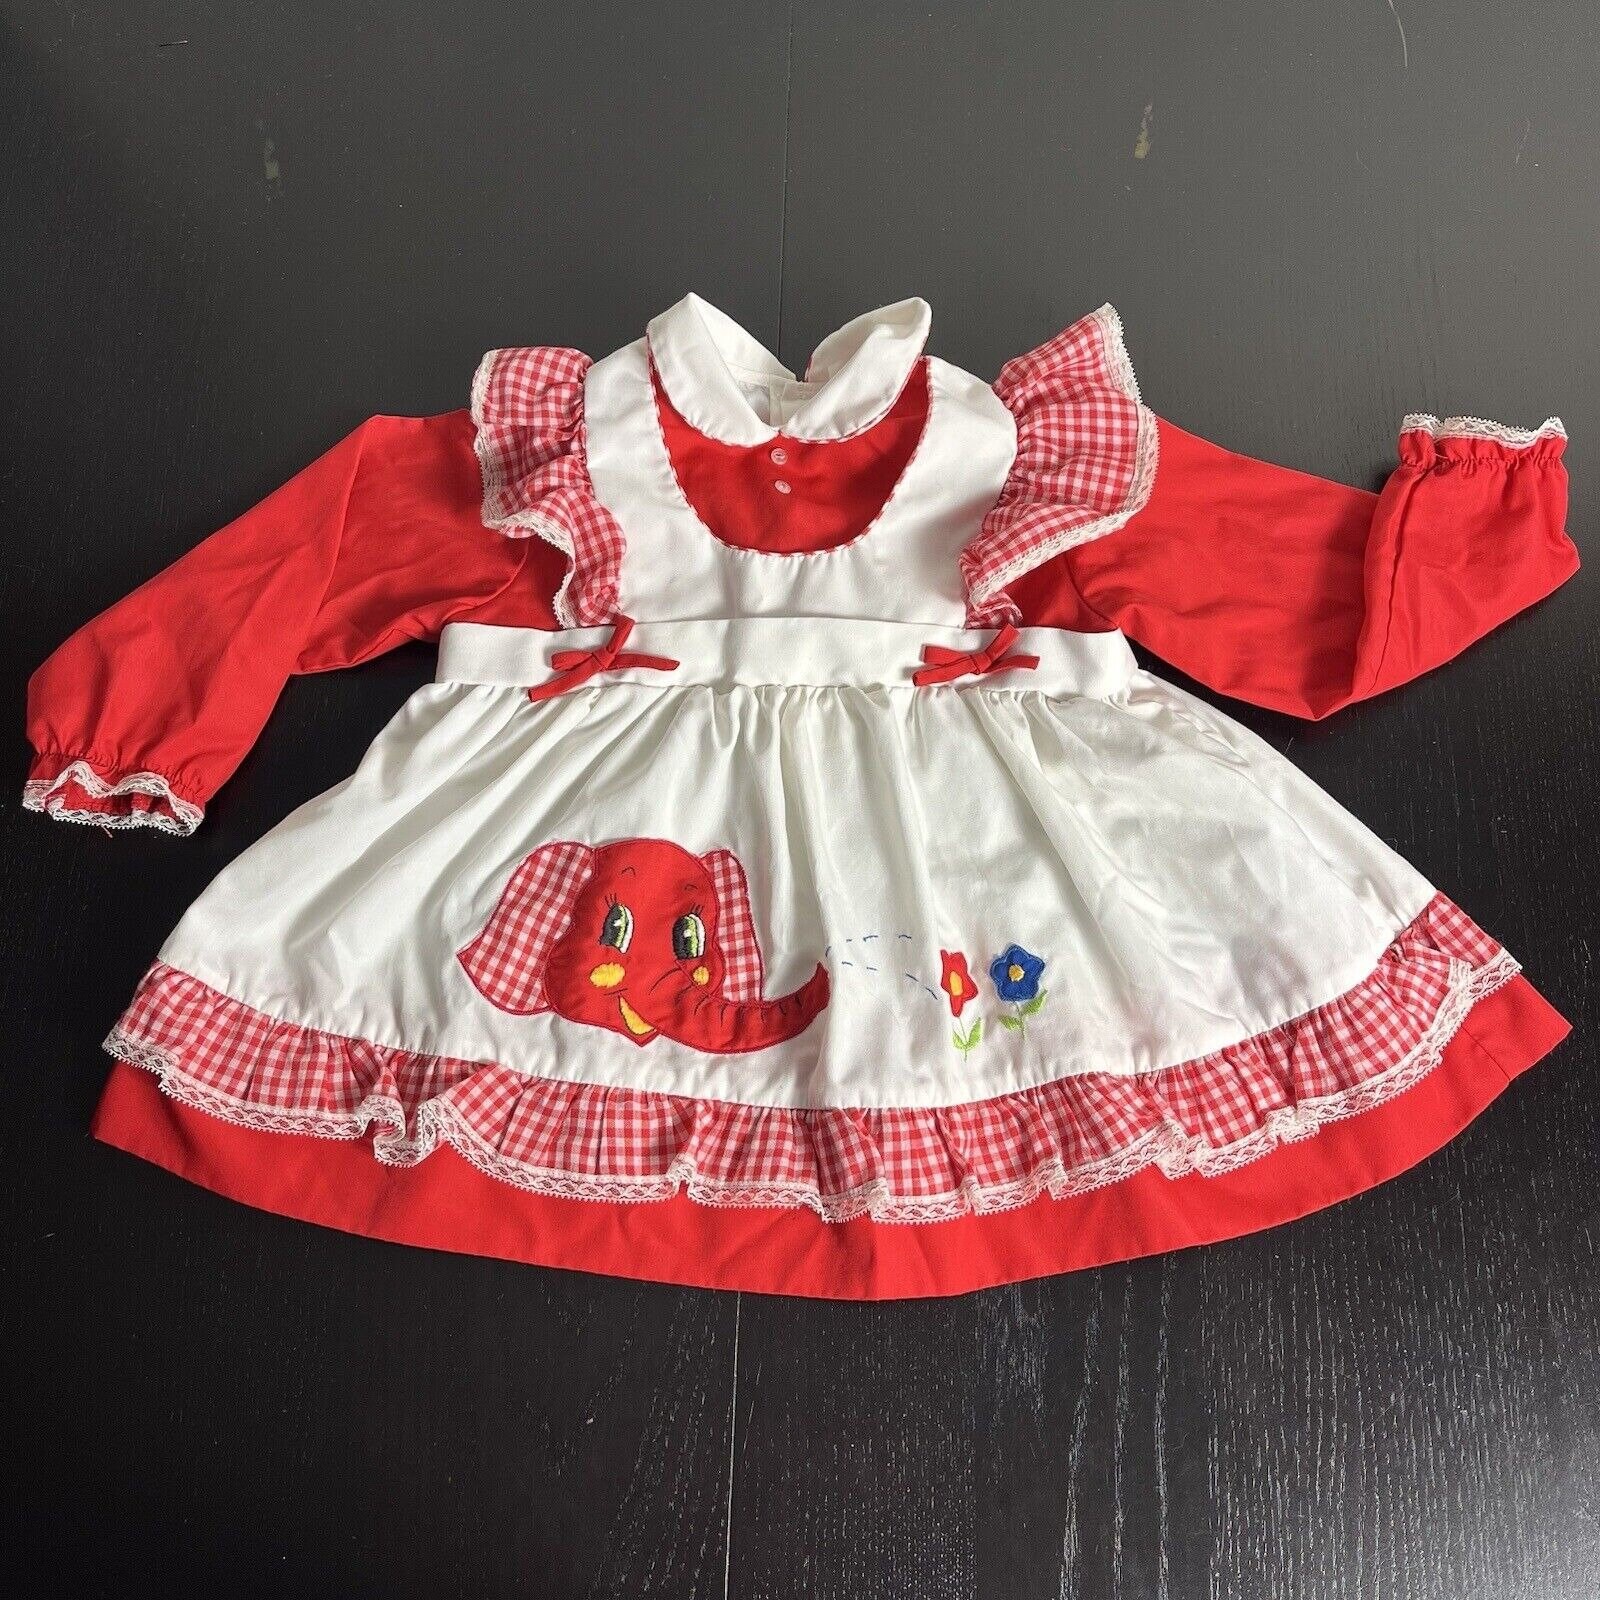 Vintage Aprons, Retro Aprons, Old Fashioned Aprons & Patterns Vintage 80S Baby Girl Dress Red White Elephant Flowers Apron Style 1980S $24.00 AT vintagedancer.com